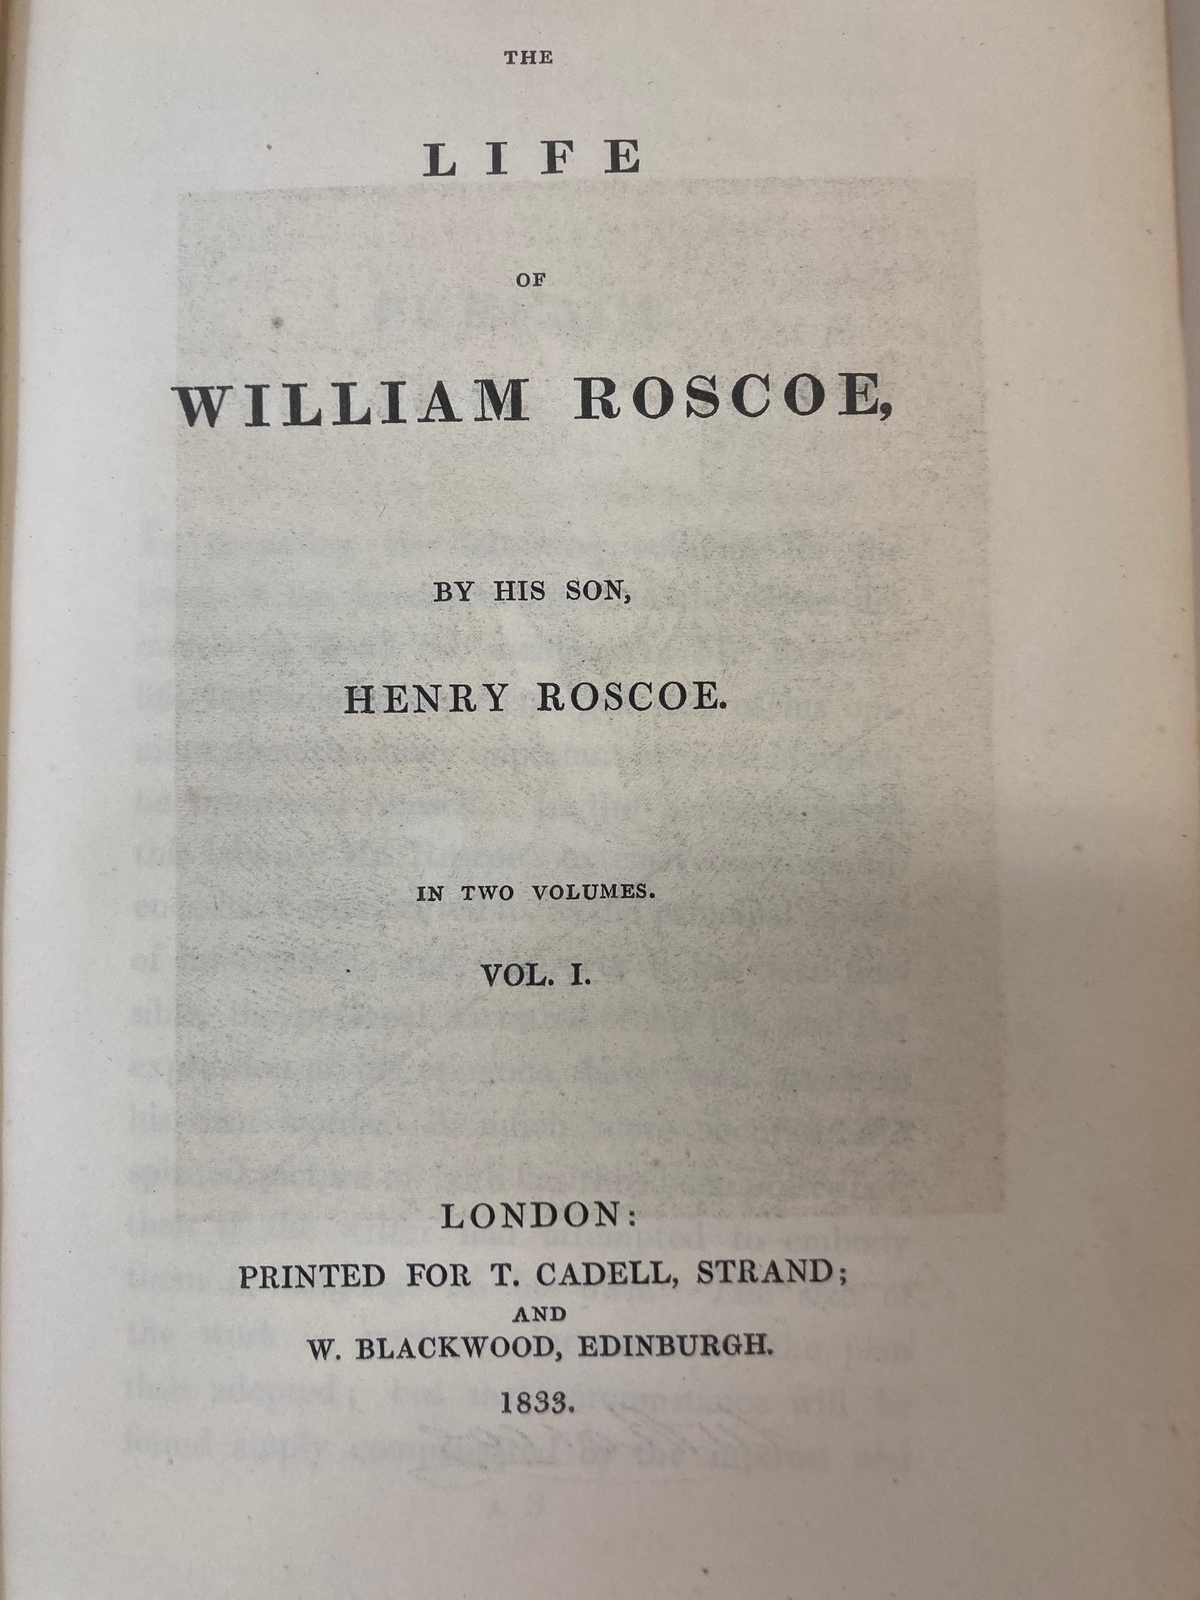 The Life of William Roscoe 2 Volumes Complete